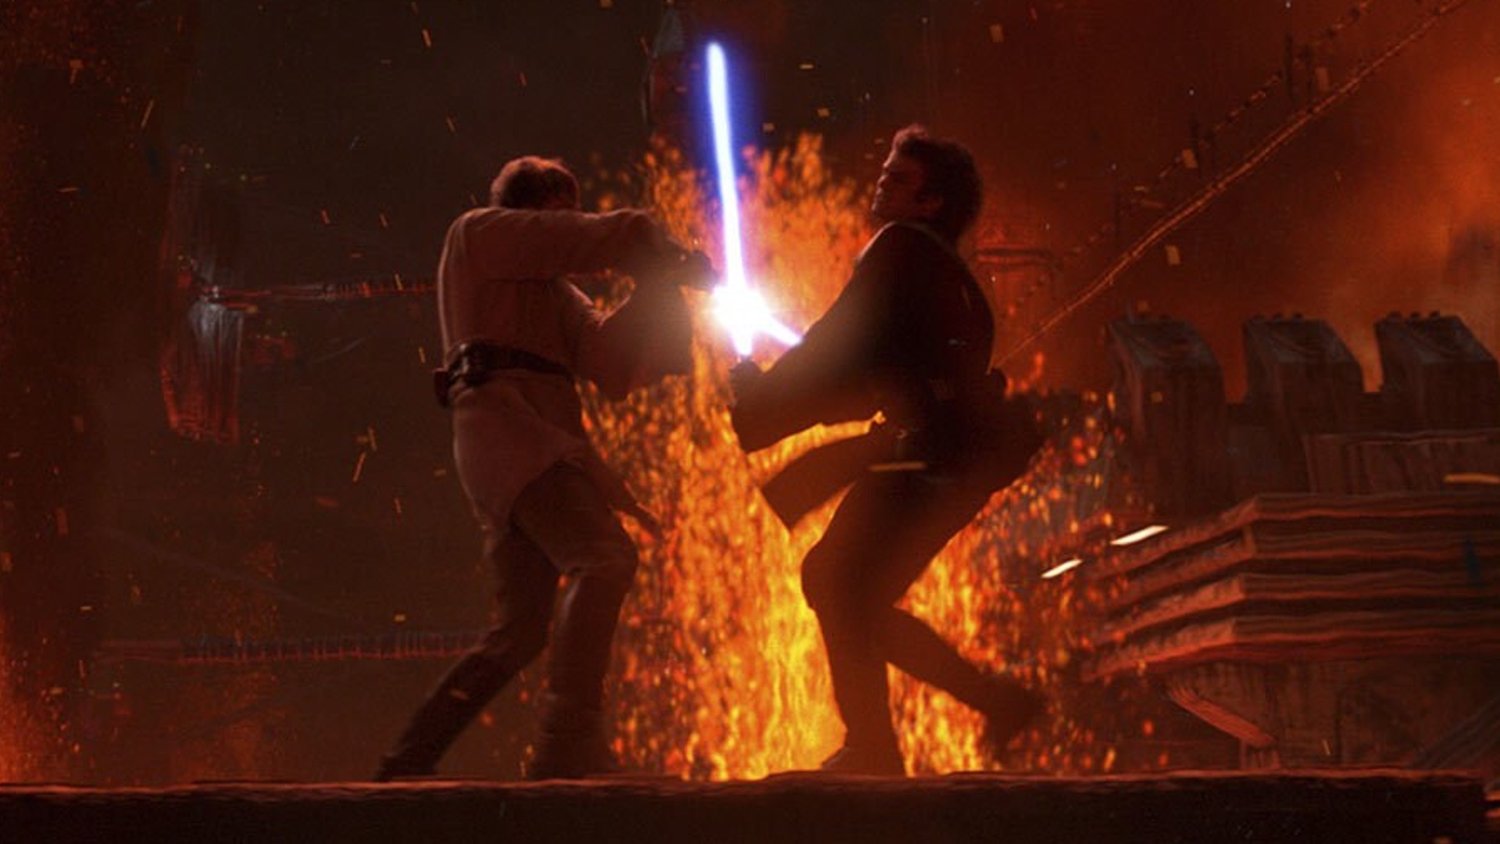 VFX Artists React To STAR WARS Projects REVENGE OF THE SITH and THE FORCE AWAKENS